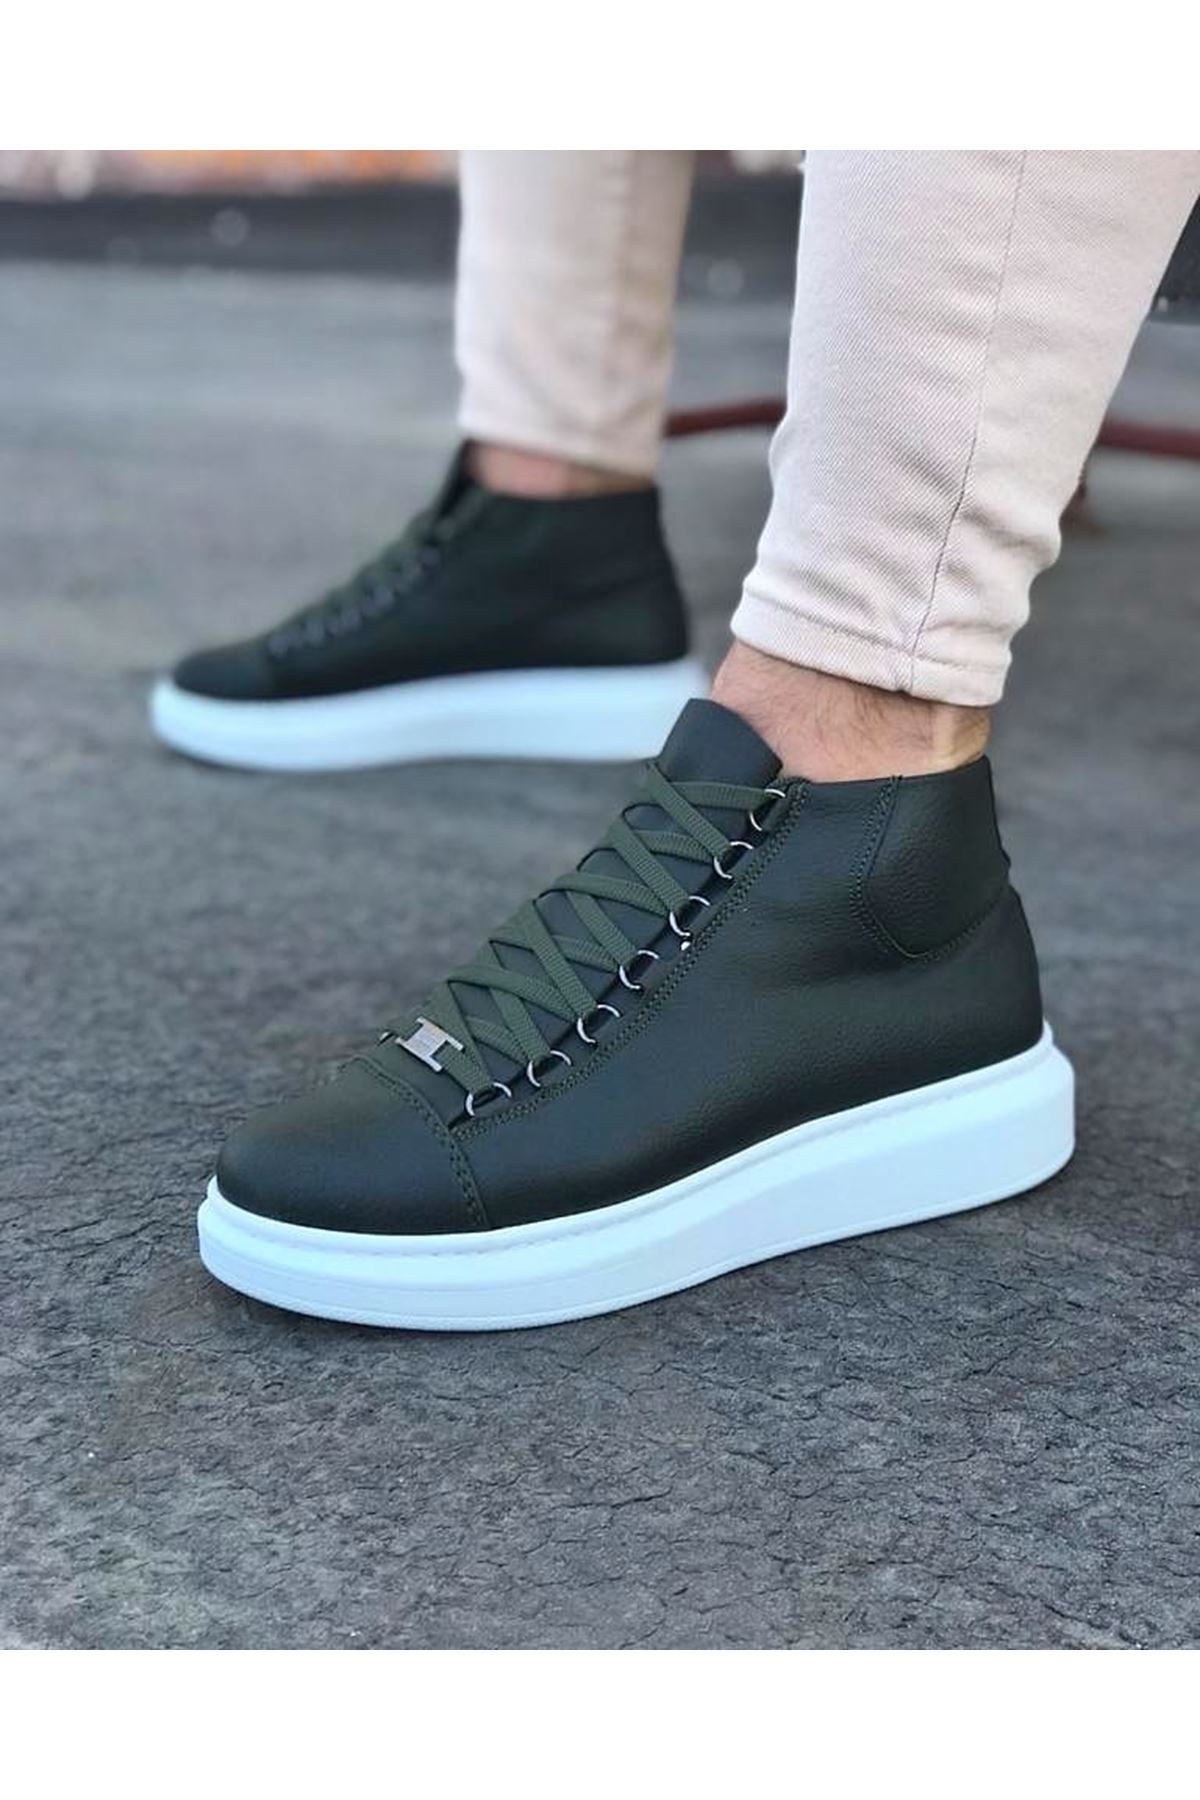 WG032 Khaki Lace-up Sneakers Half Ankle Boots - STREETMODE™